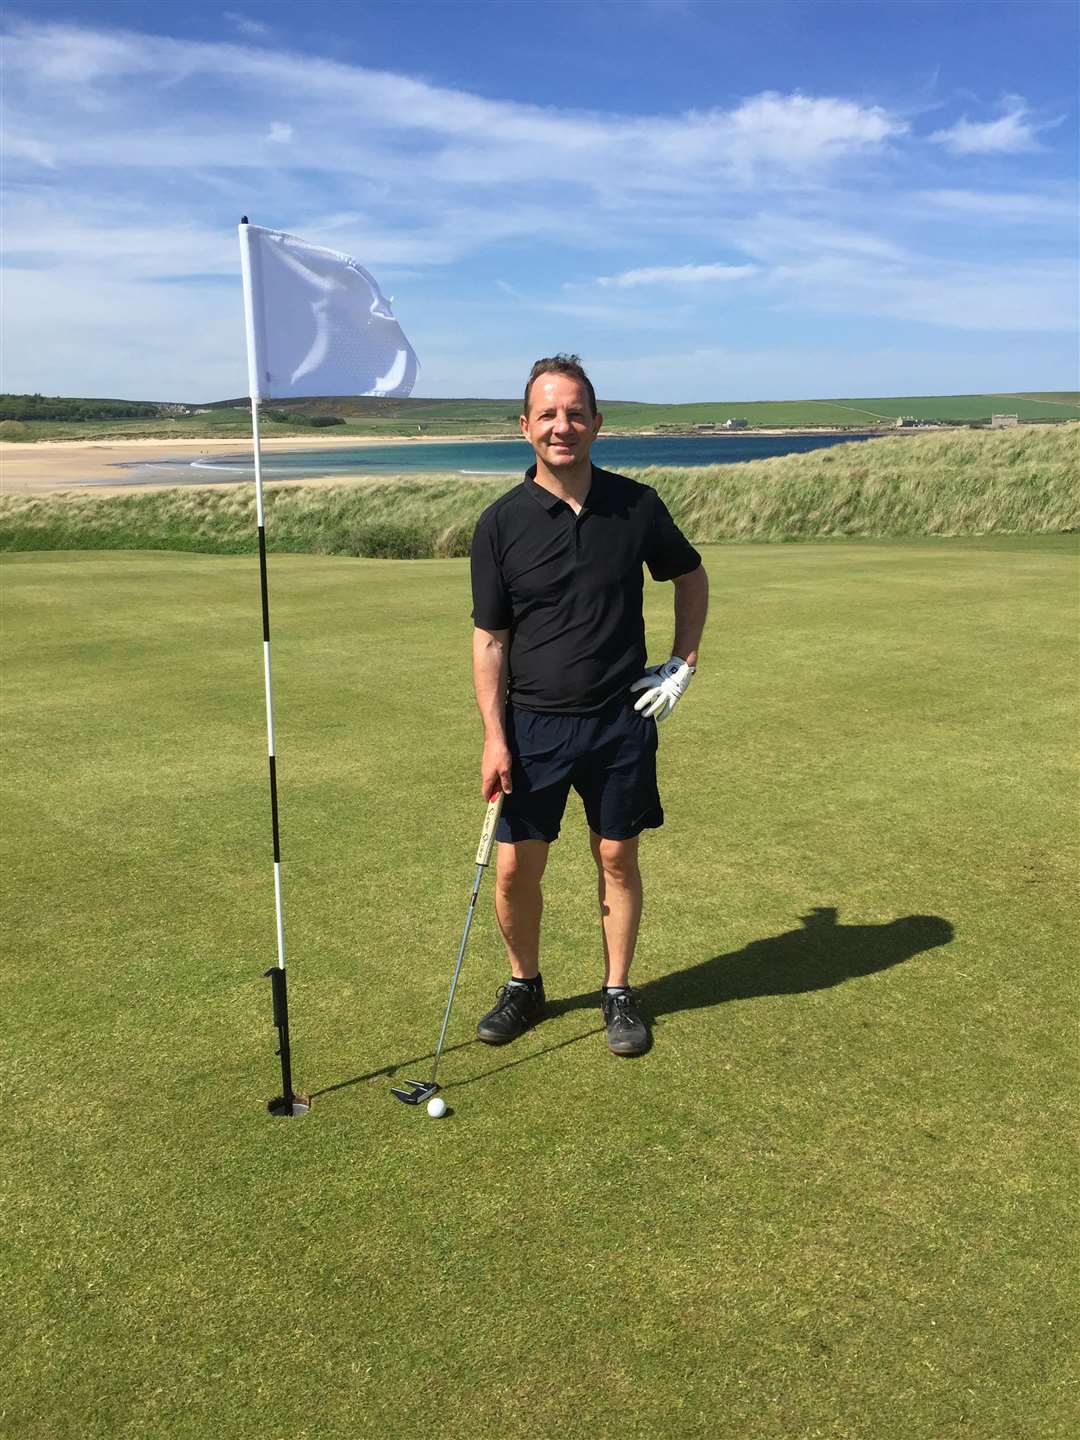 Enjoying the near-perfect conditions on Friday is Reay Golf Club captain Andy Bain, at the ninth hole.